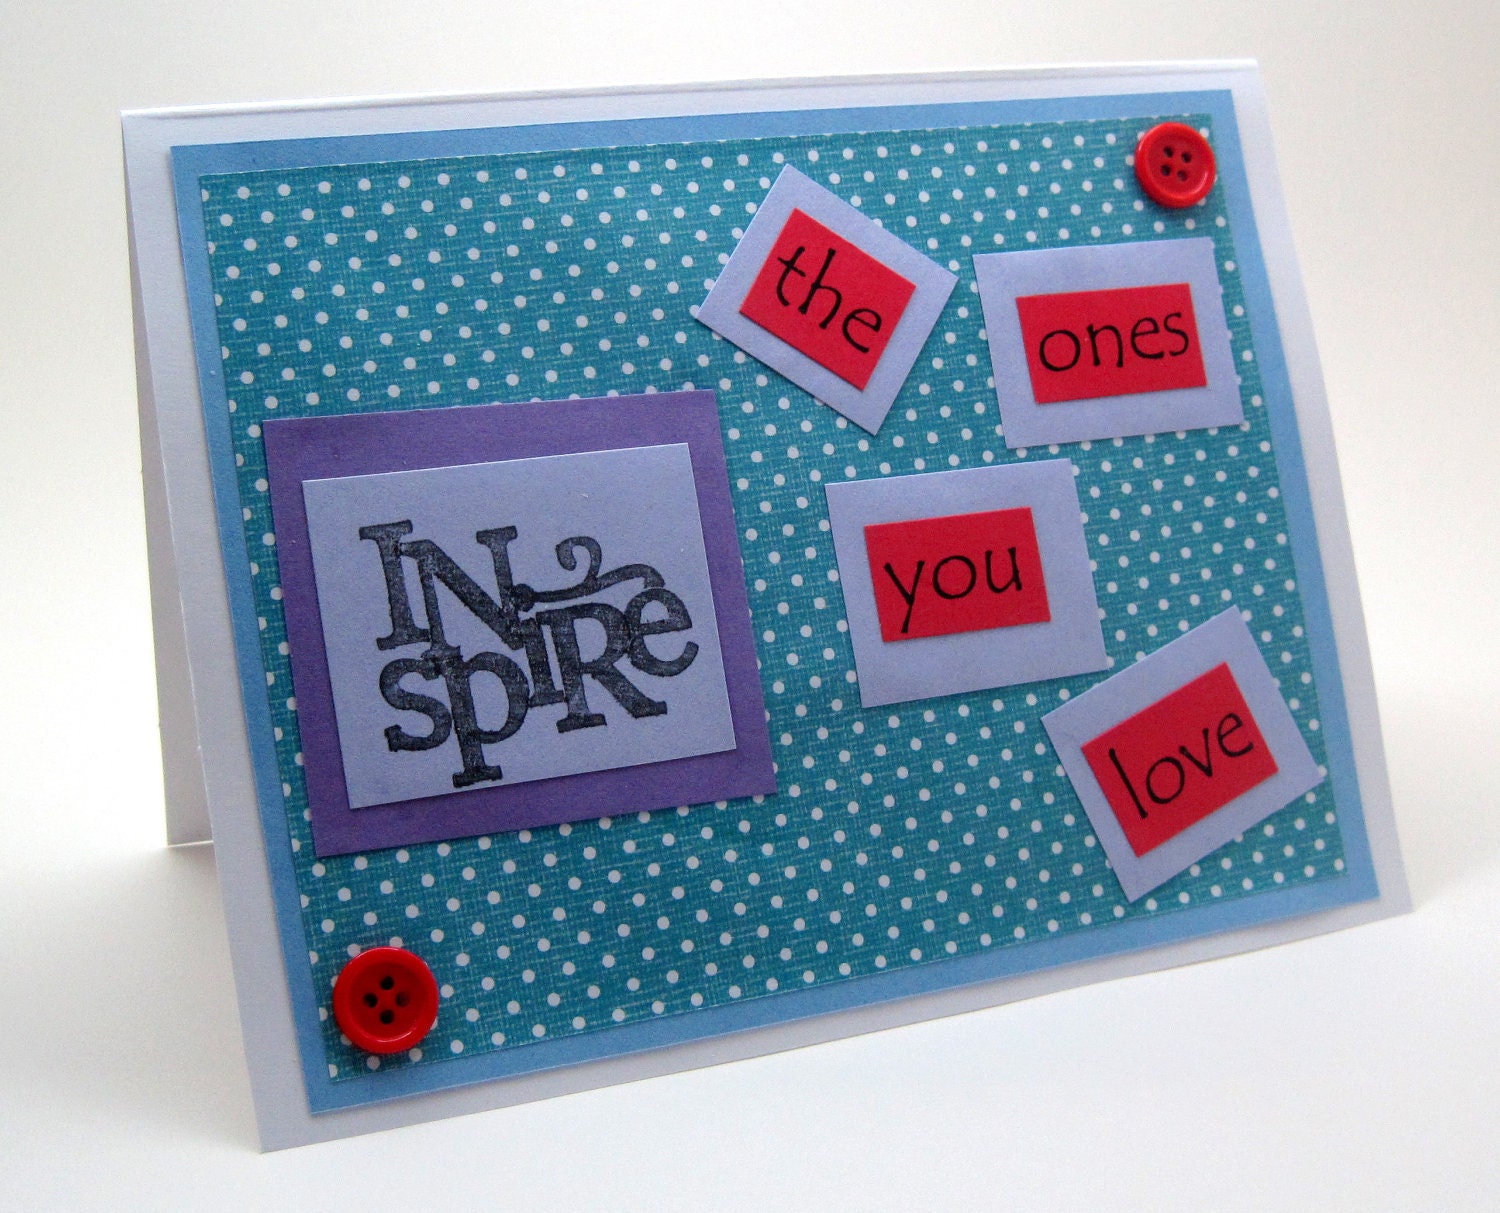 FREE SHIPPING in the US Valentine's Day Greeting Card - Inspire the Ones You Love by randomcreative on Etsy - randomcreative